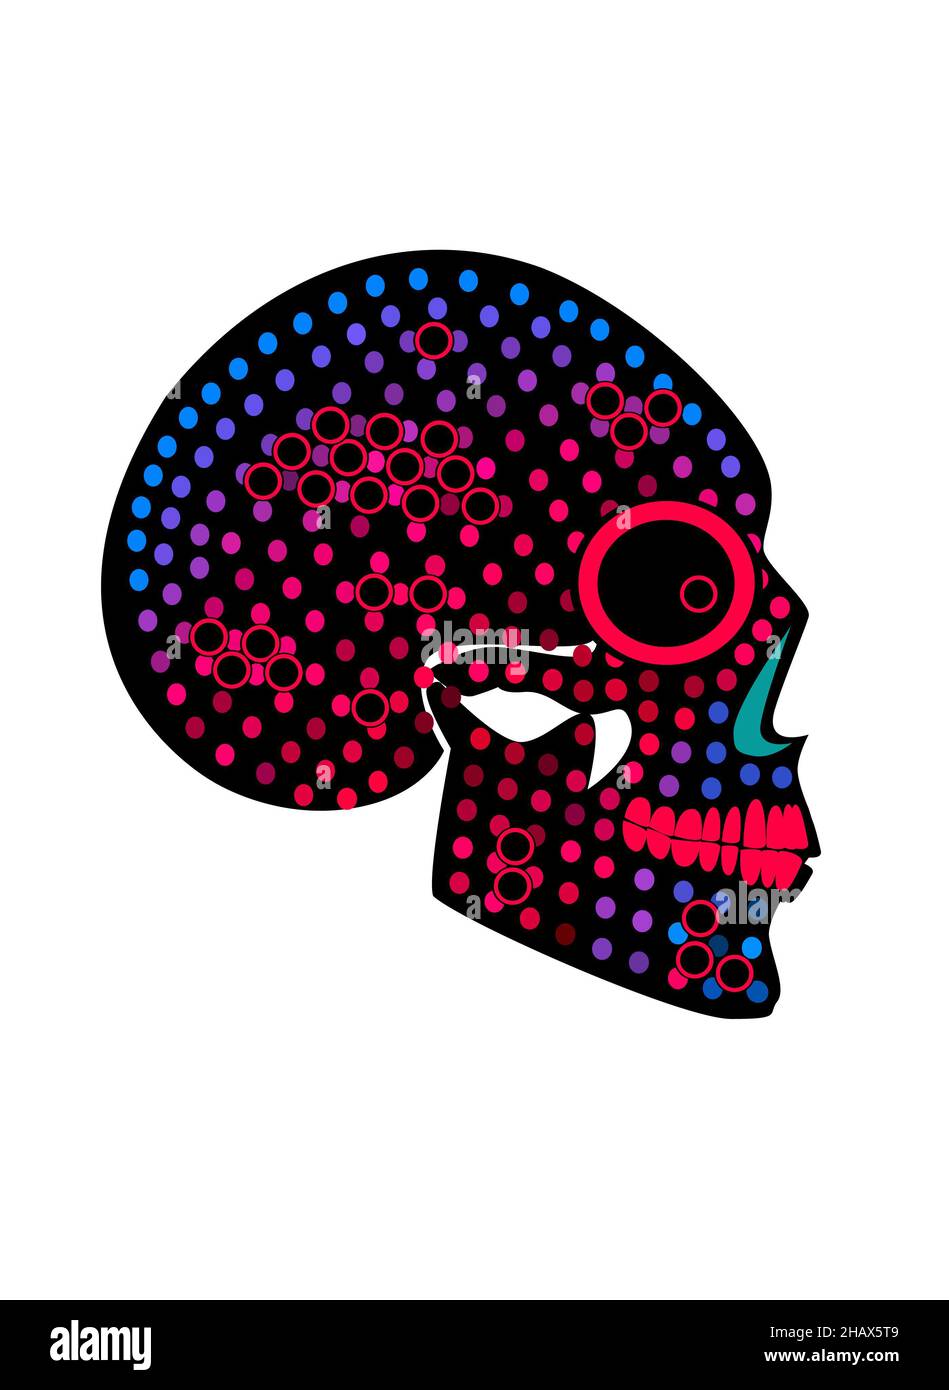 Skull icon, halftone neon color background for fashion design, patterns and tattoos Stock Photo